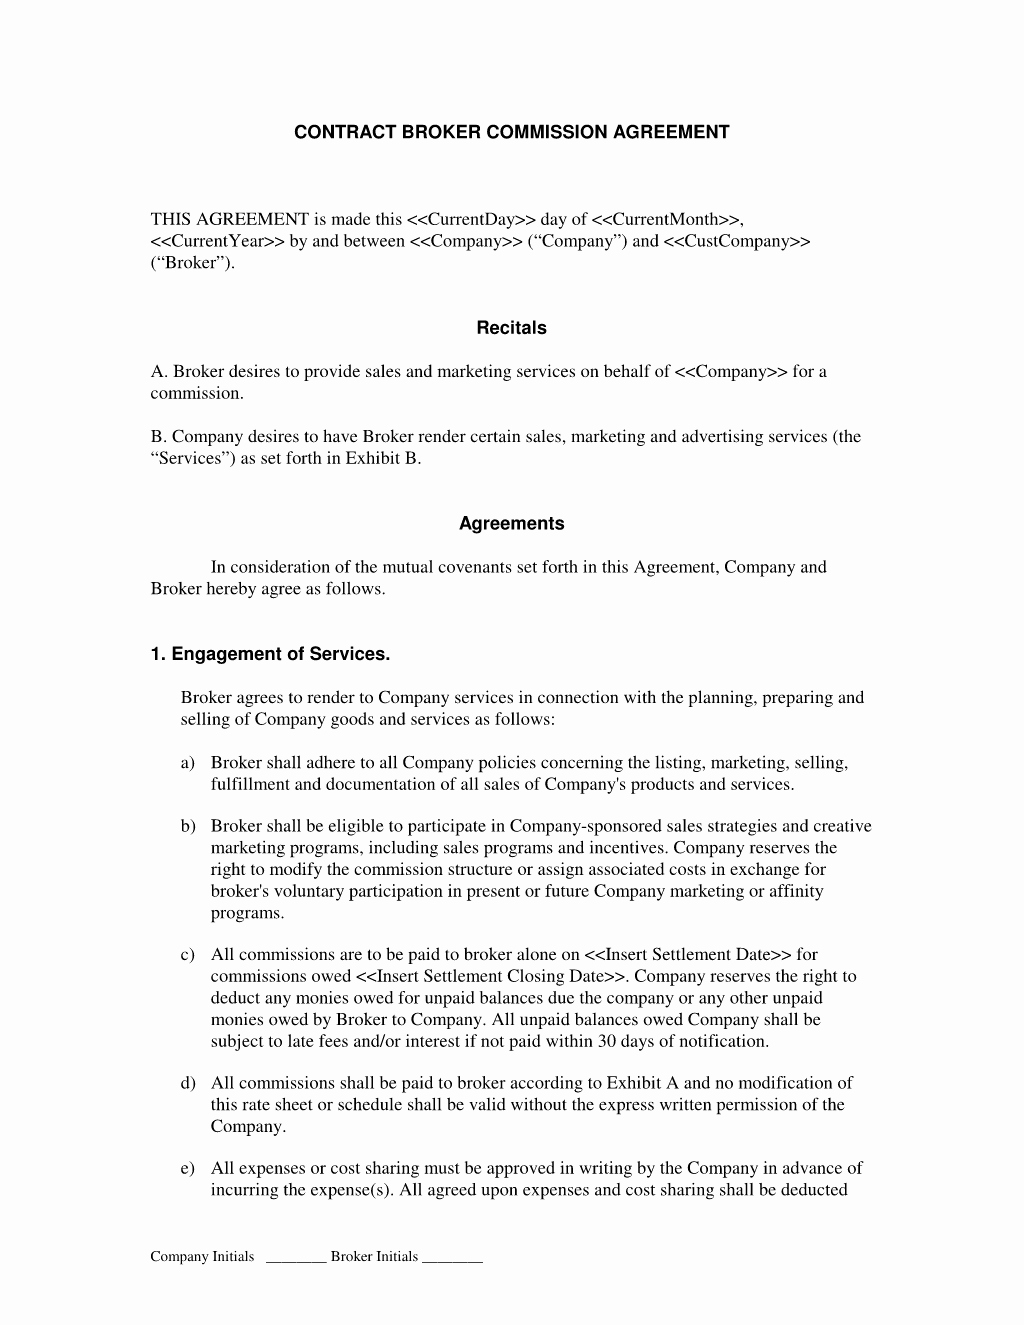 Sales Commission Agreement Template Elegant Broker Mission Sales Agreement Advertising and